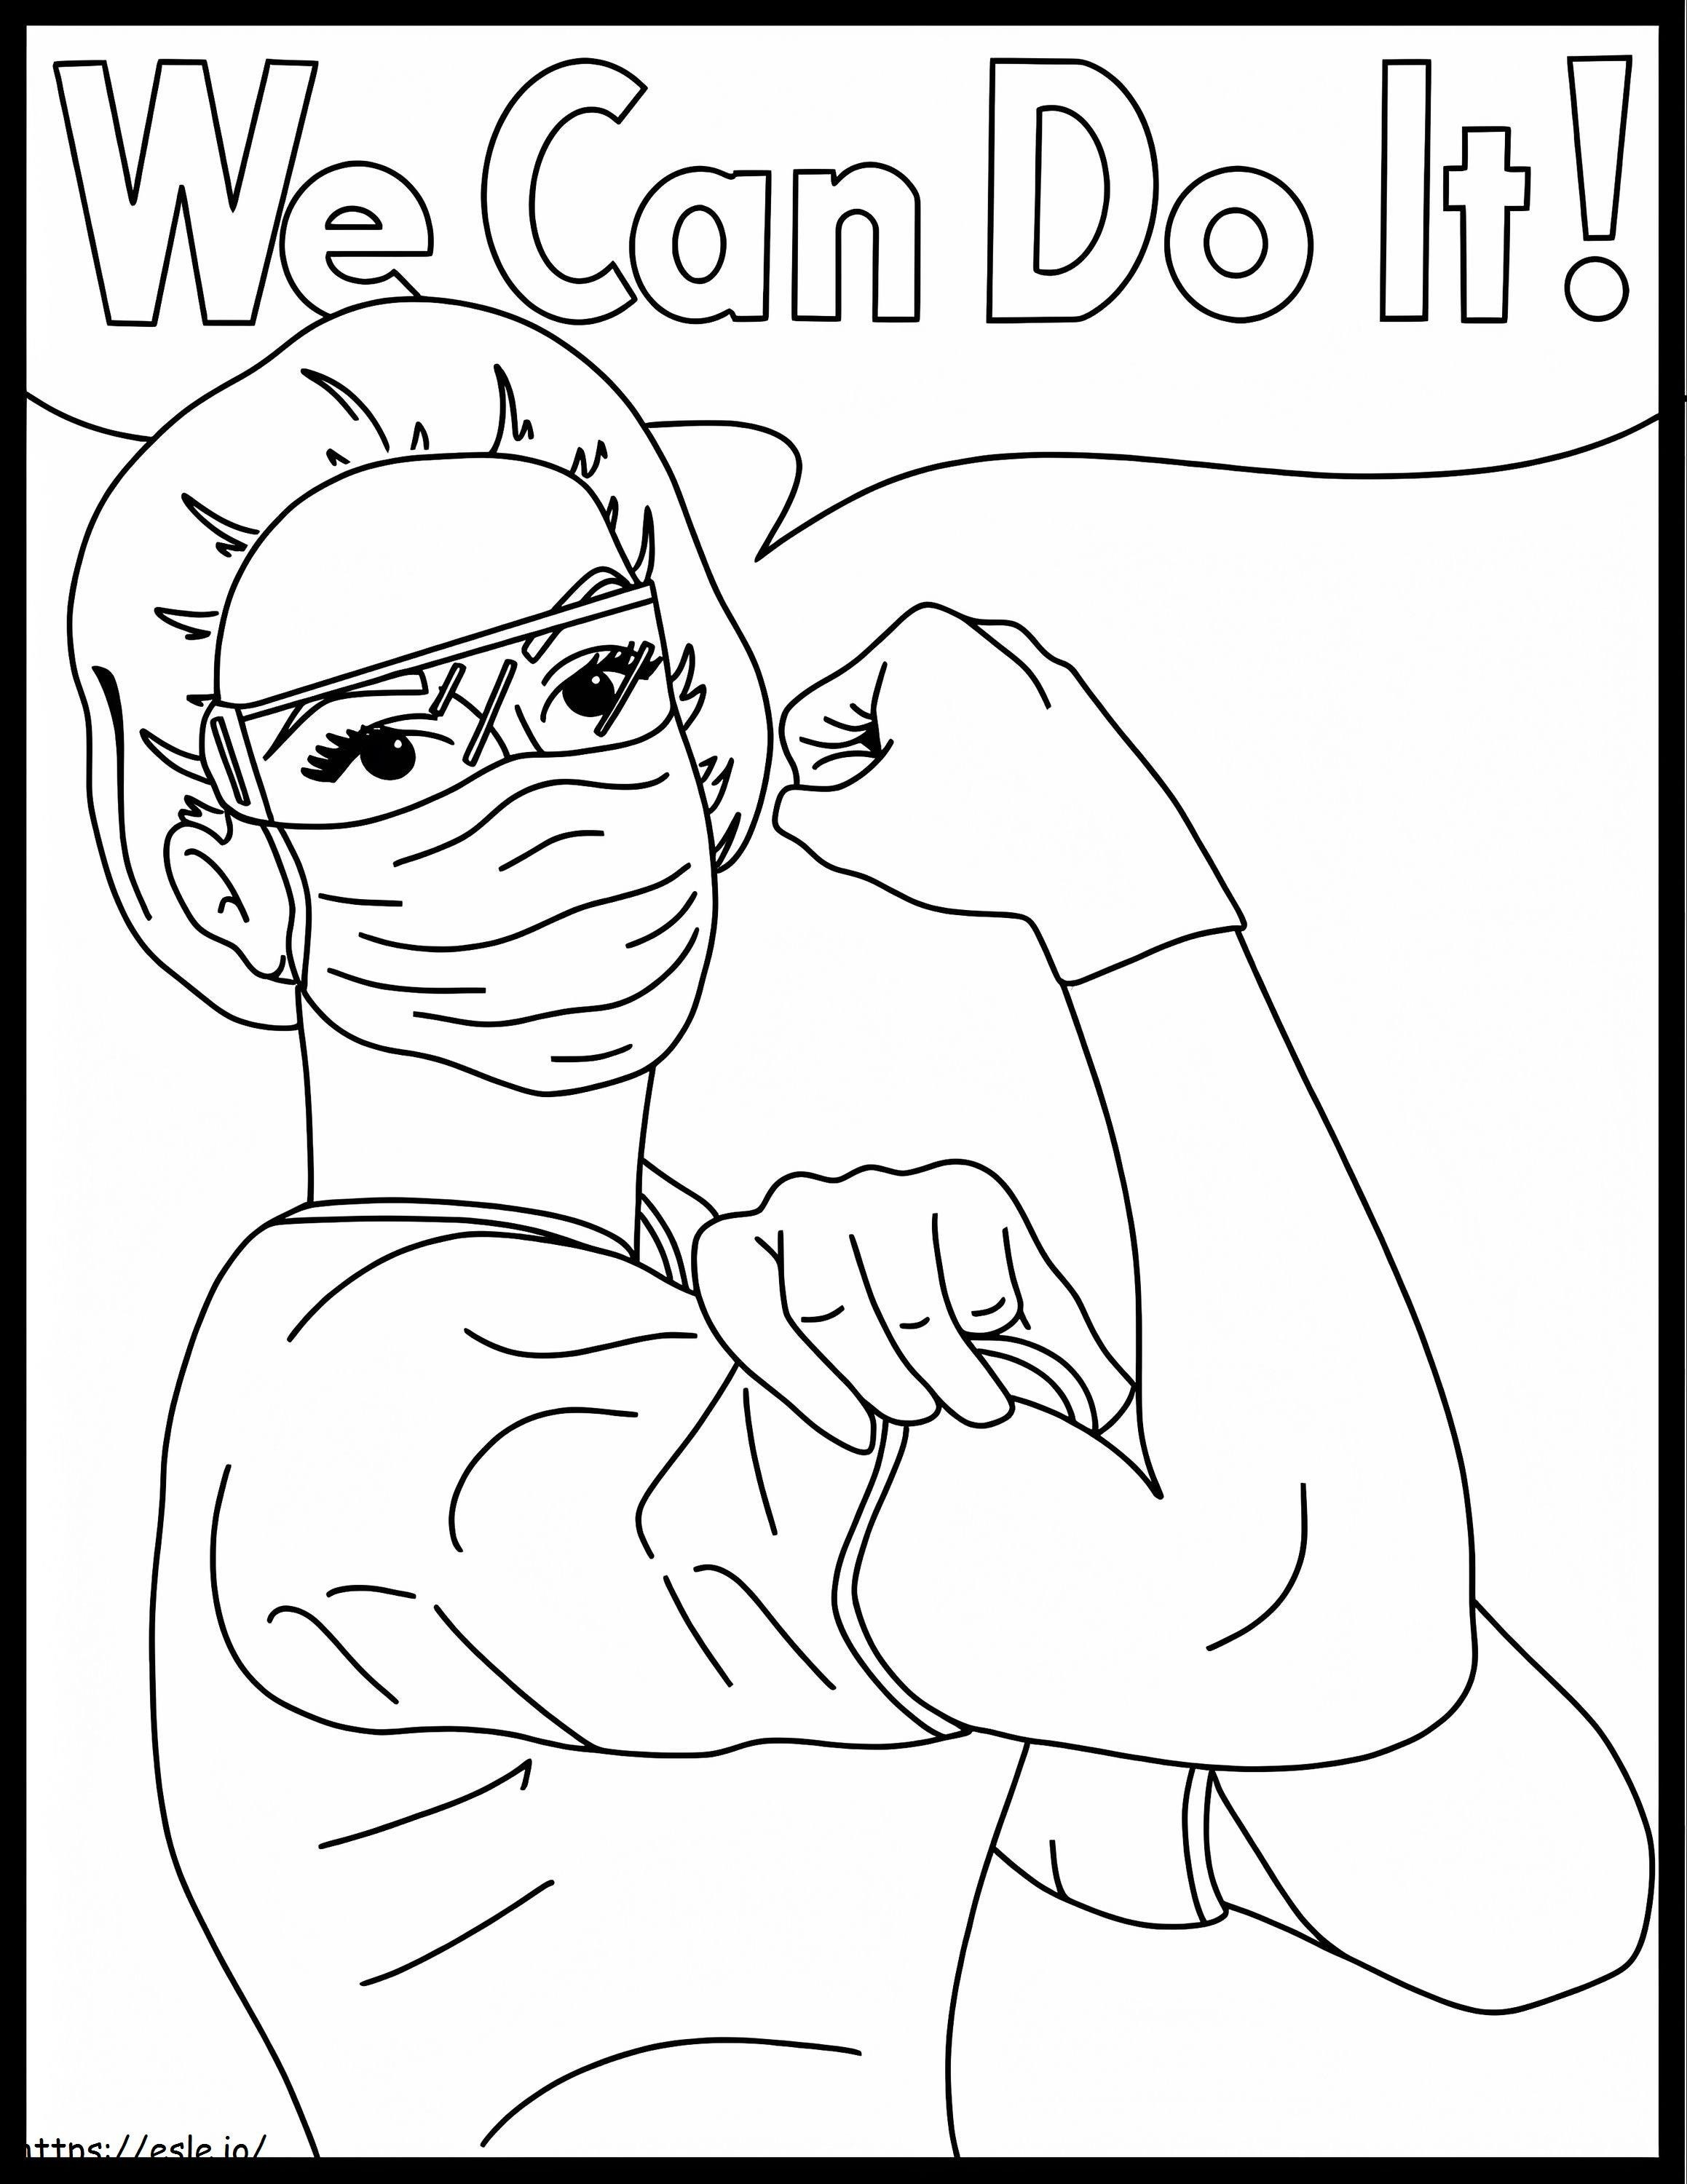 Strong Nurse coloring page